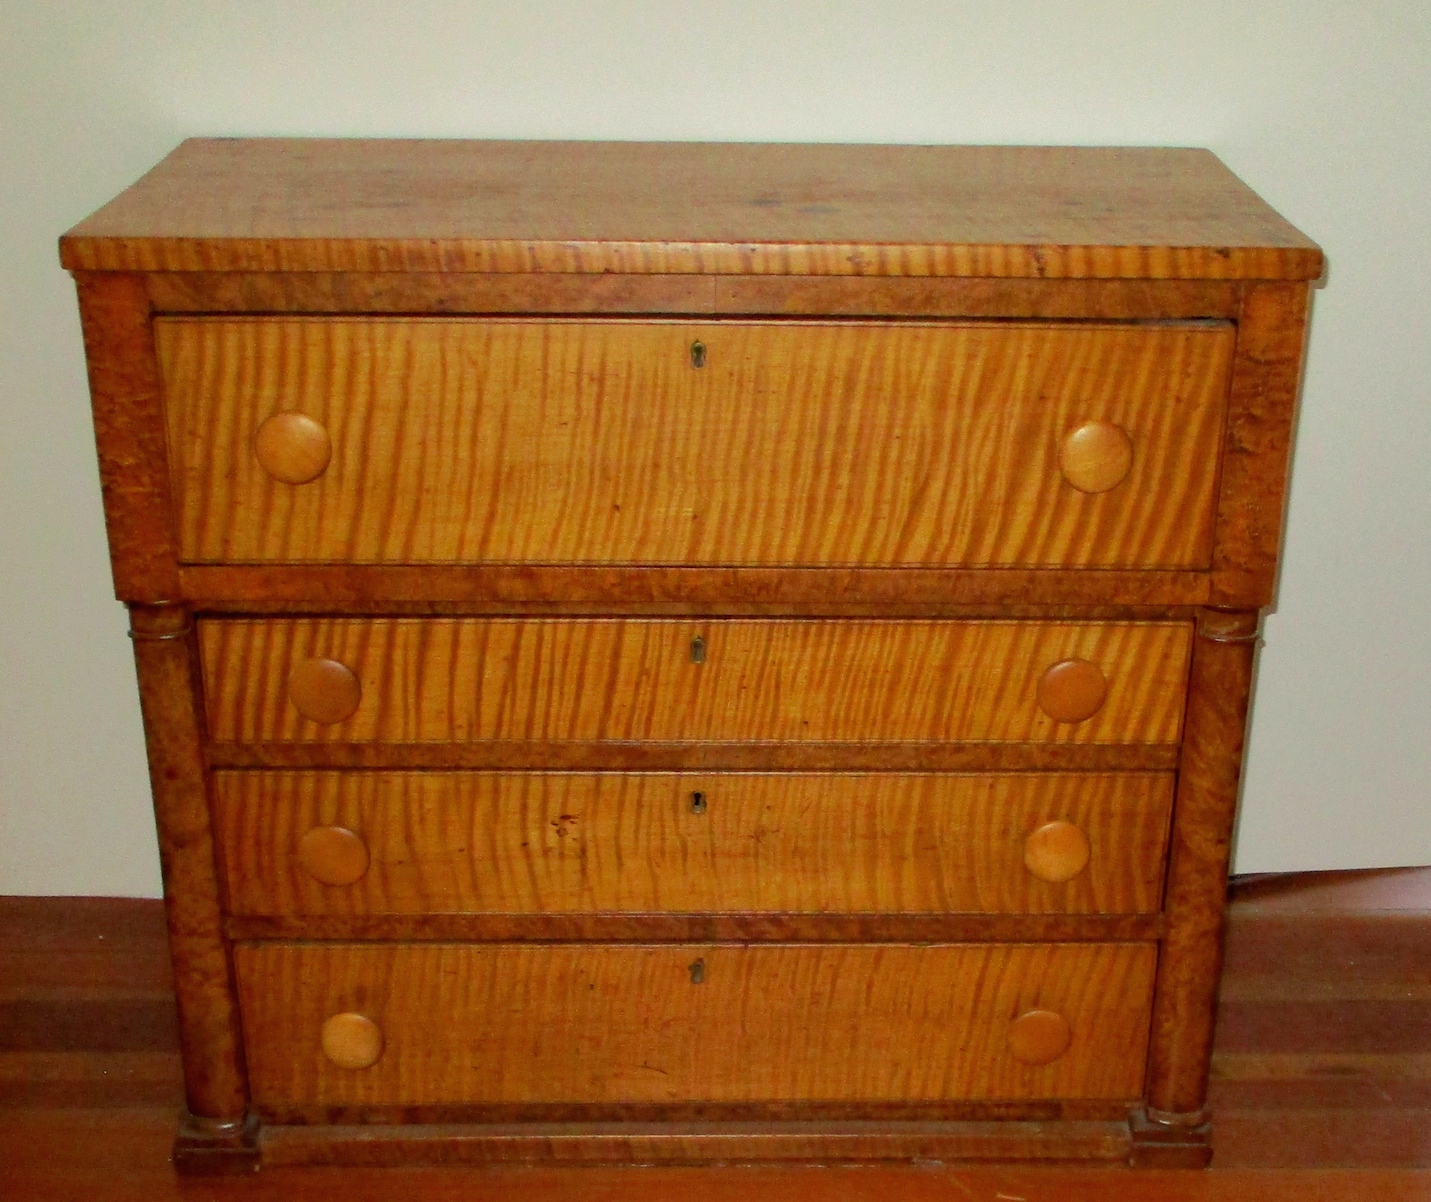 Mid-size Early 19th Century 4-Drawer Curly Maple Chest (22" W x 39" H x 24" D)